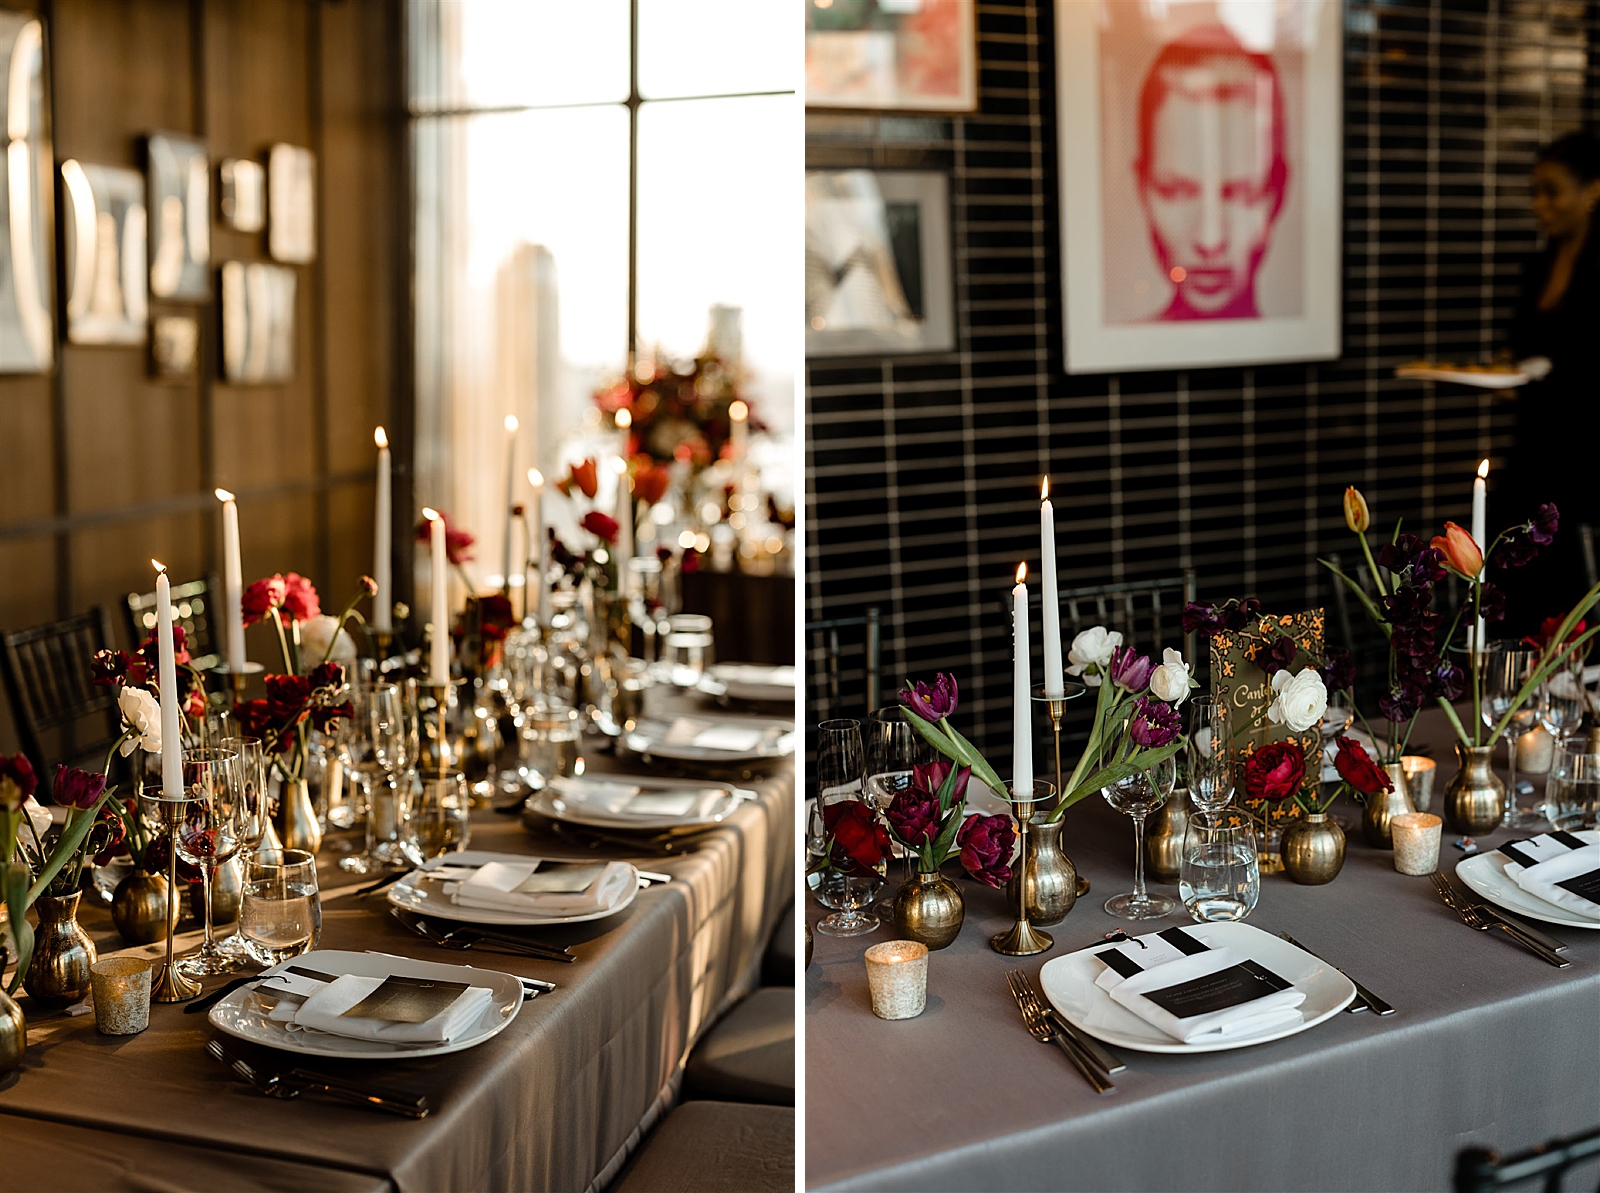 Left photo: shot of the reception table.
Right photo: shot of the reception table.